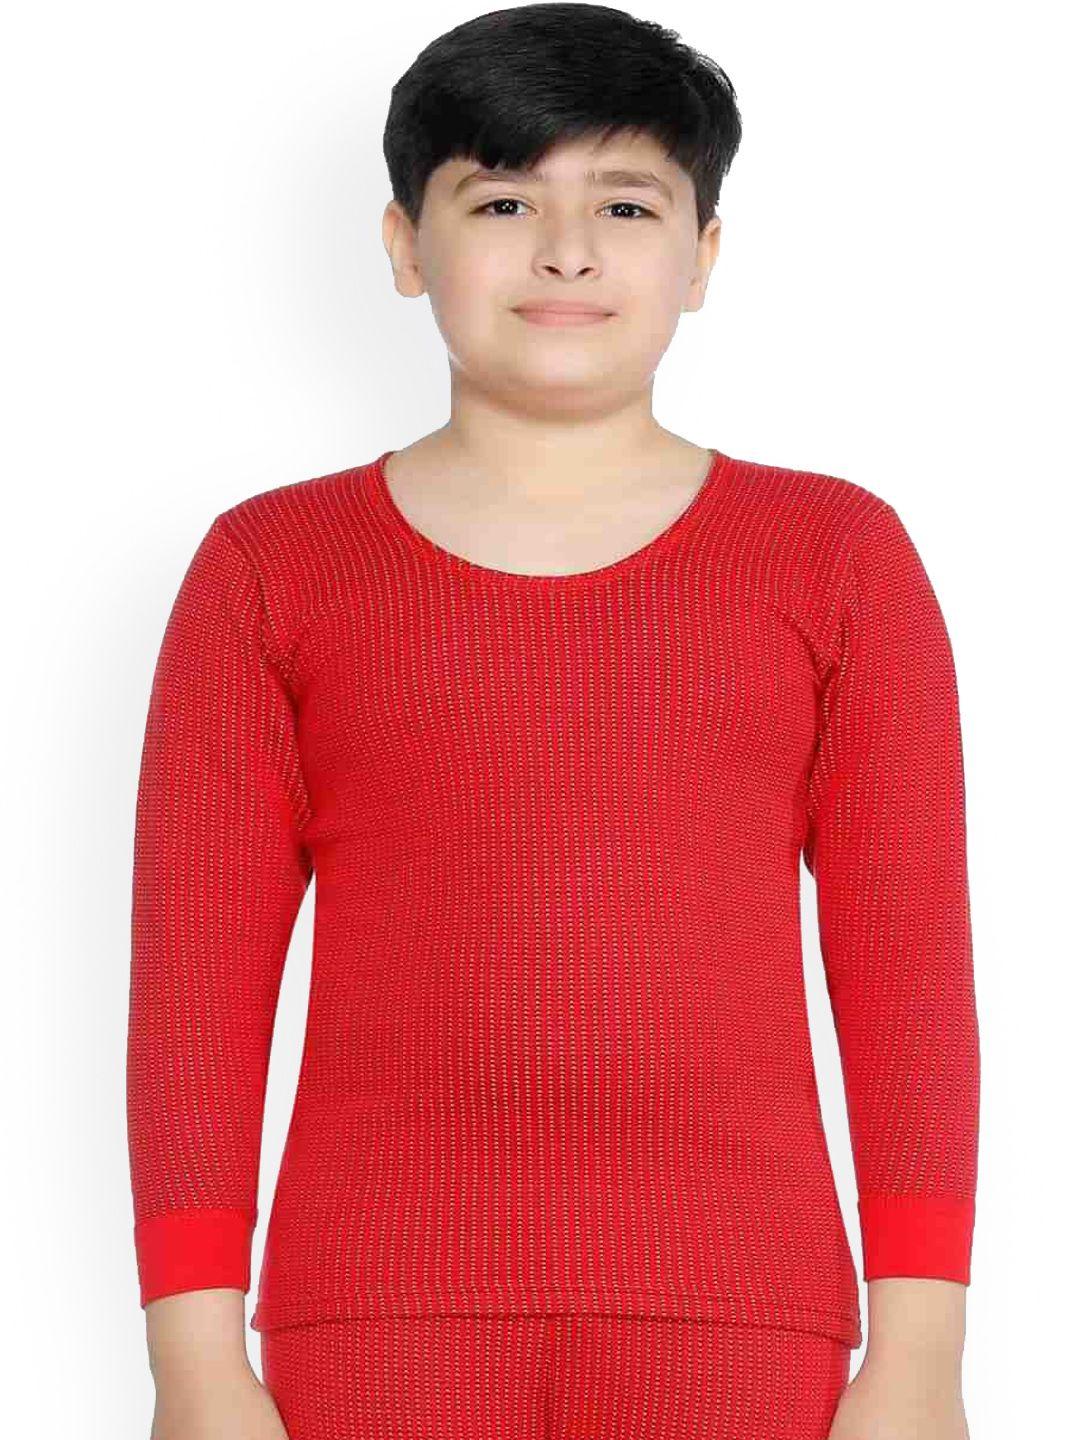 bodycare-kids-boys-red--cotton-thermal-tops